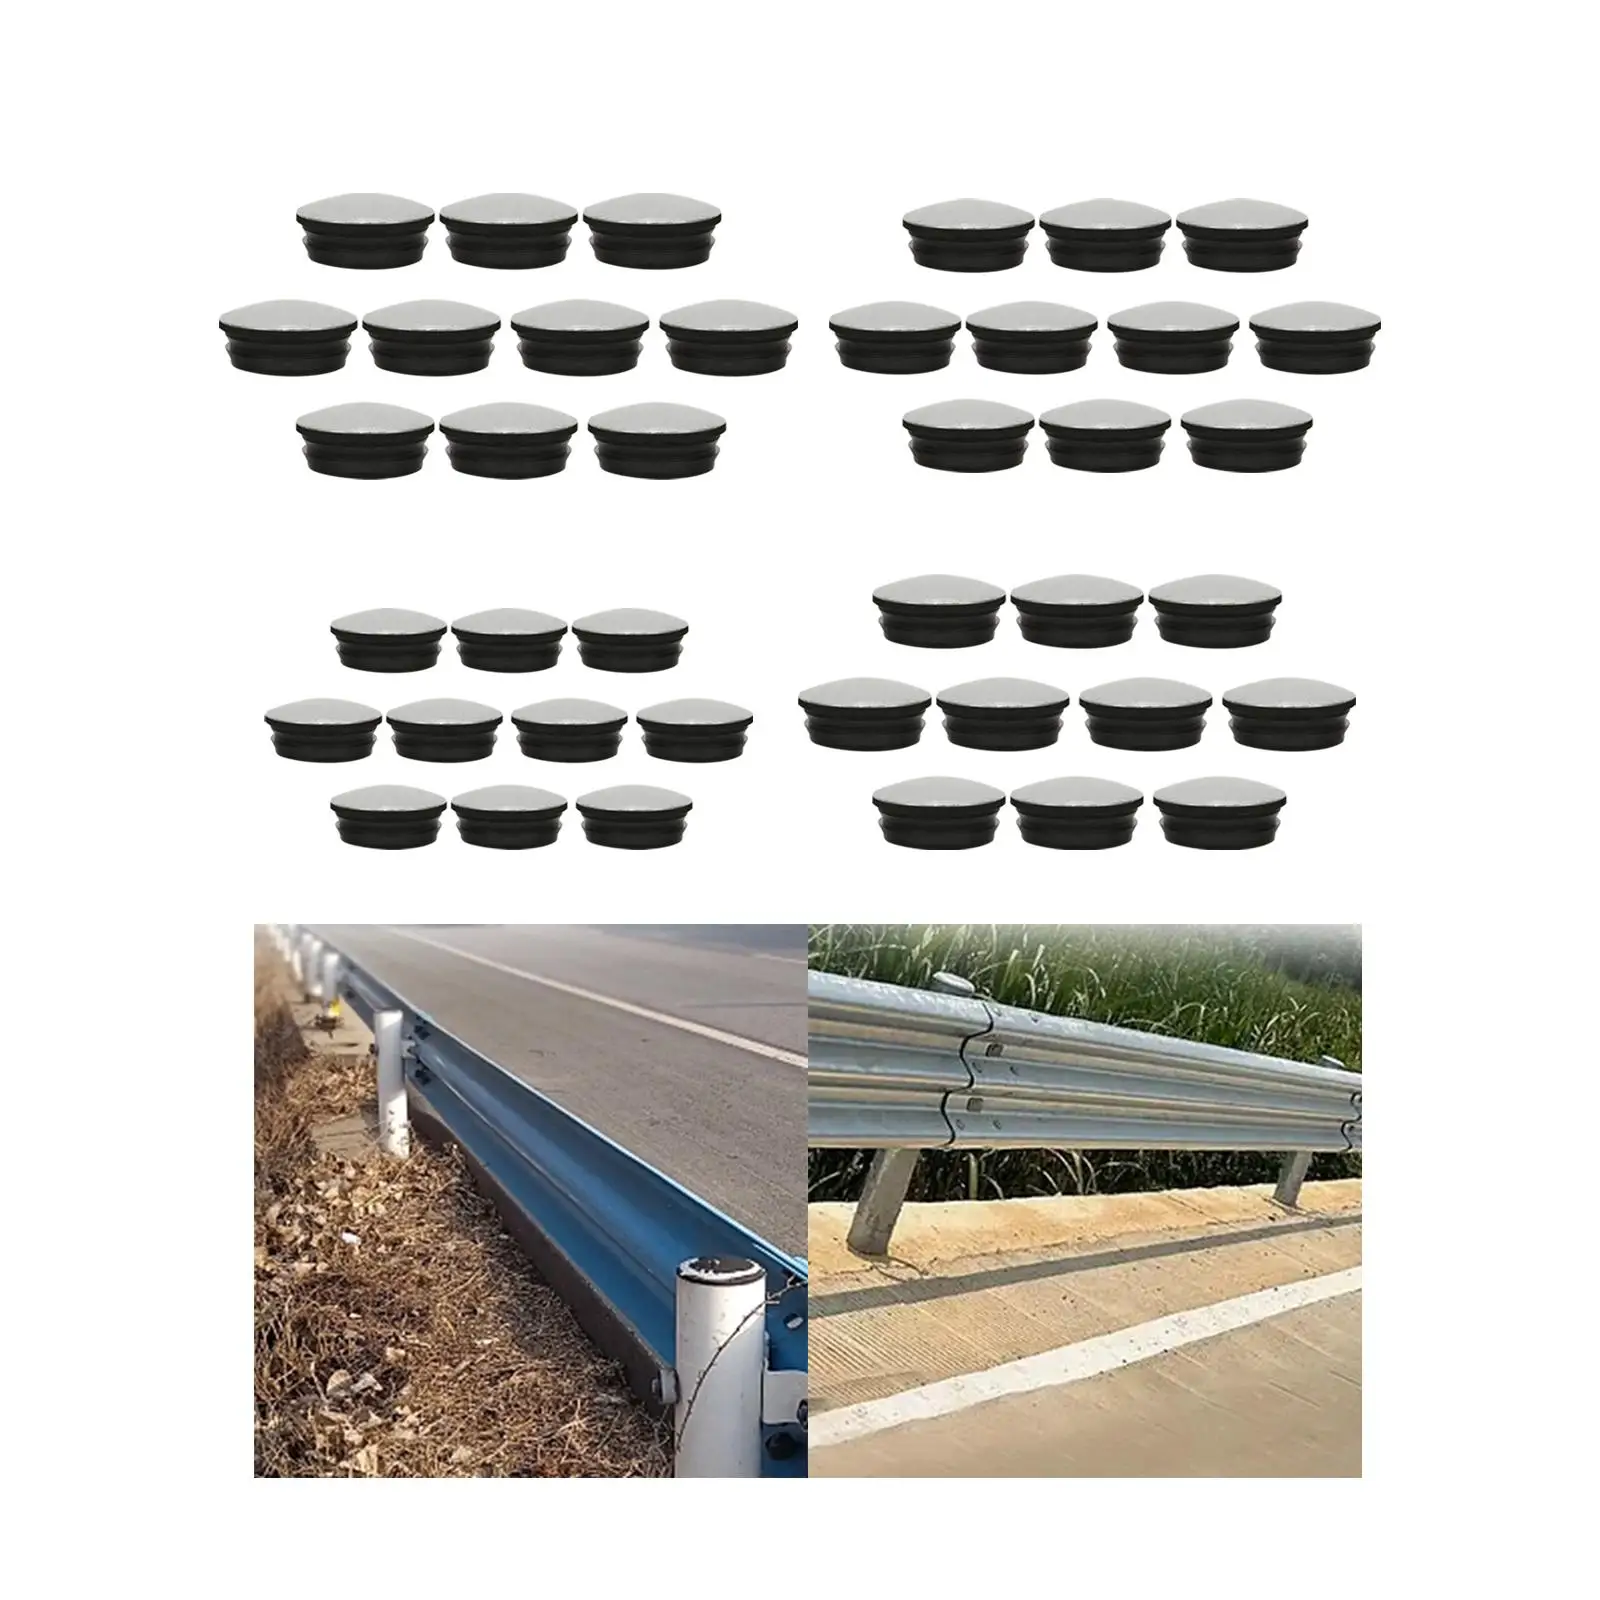 10 Pieces Fence Post Caps Easy Installation Weather Resistant Sturdy Rubber for Highway Guardrail Farm Fence Outdoor